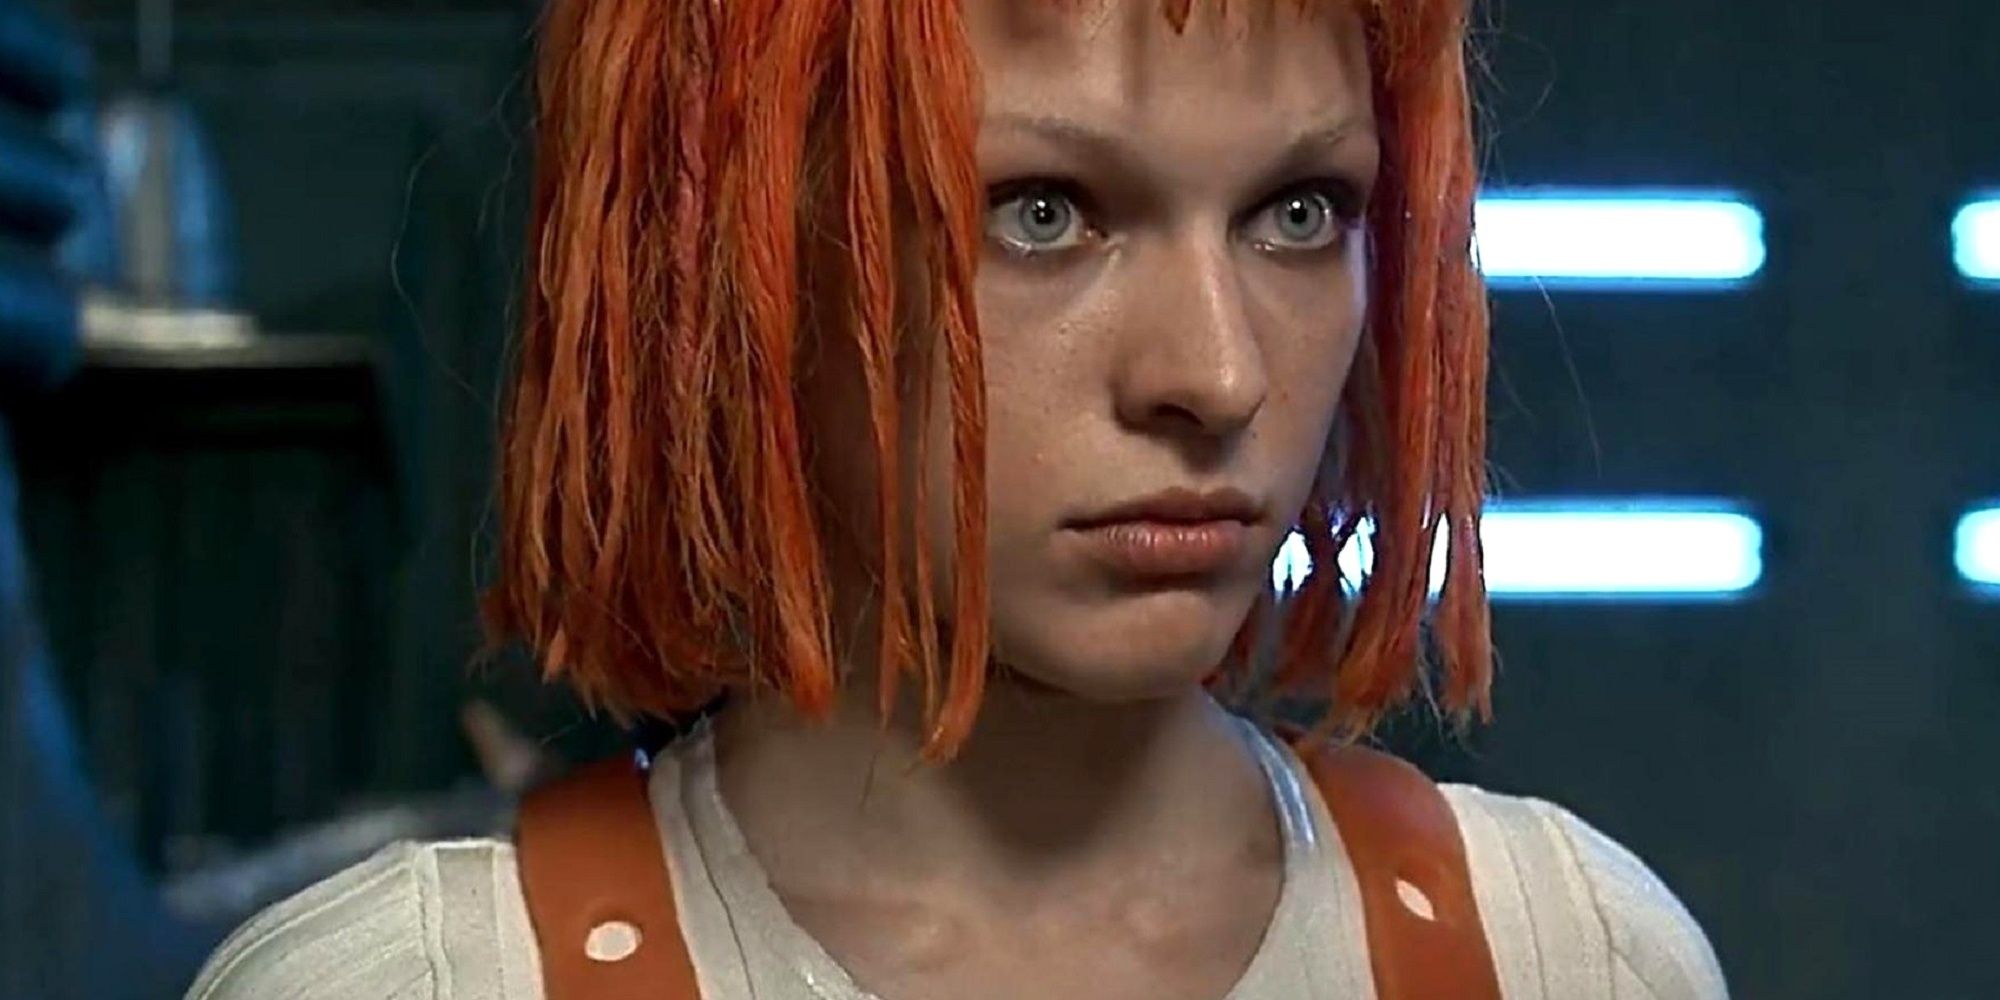 Milla Jovovich as Leeloo in The Fifth Element